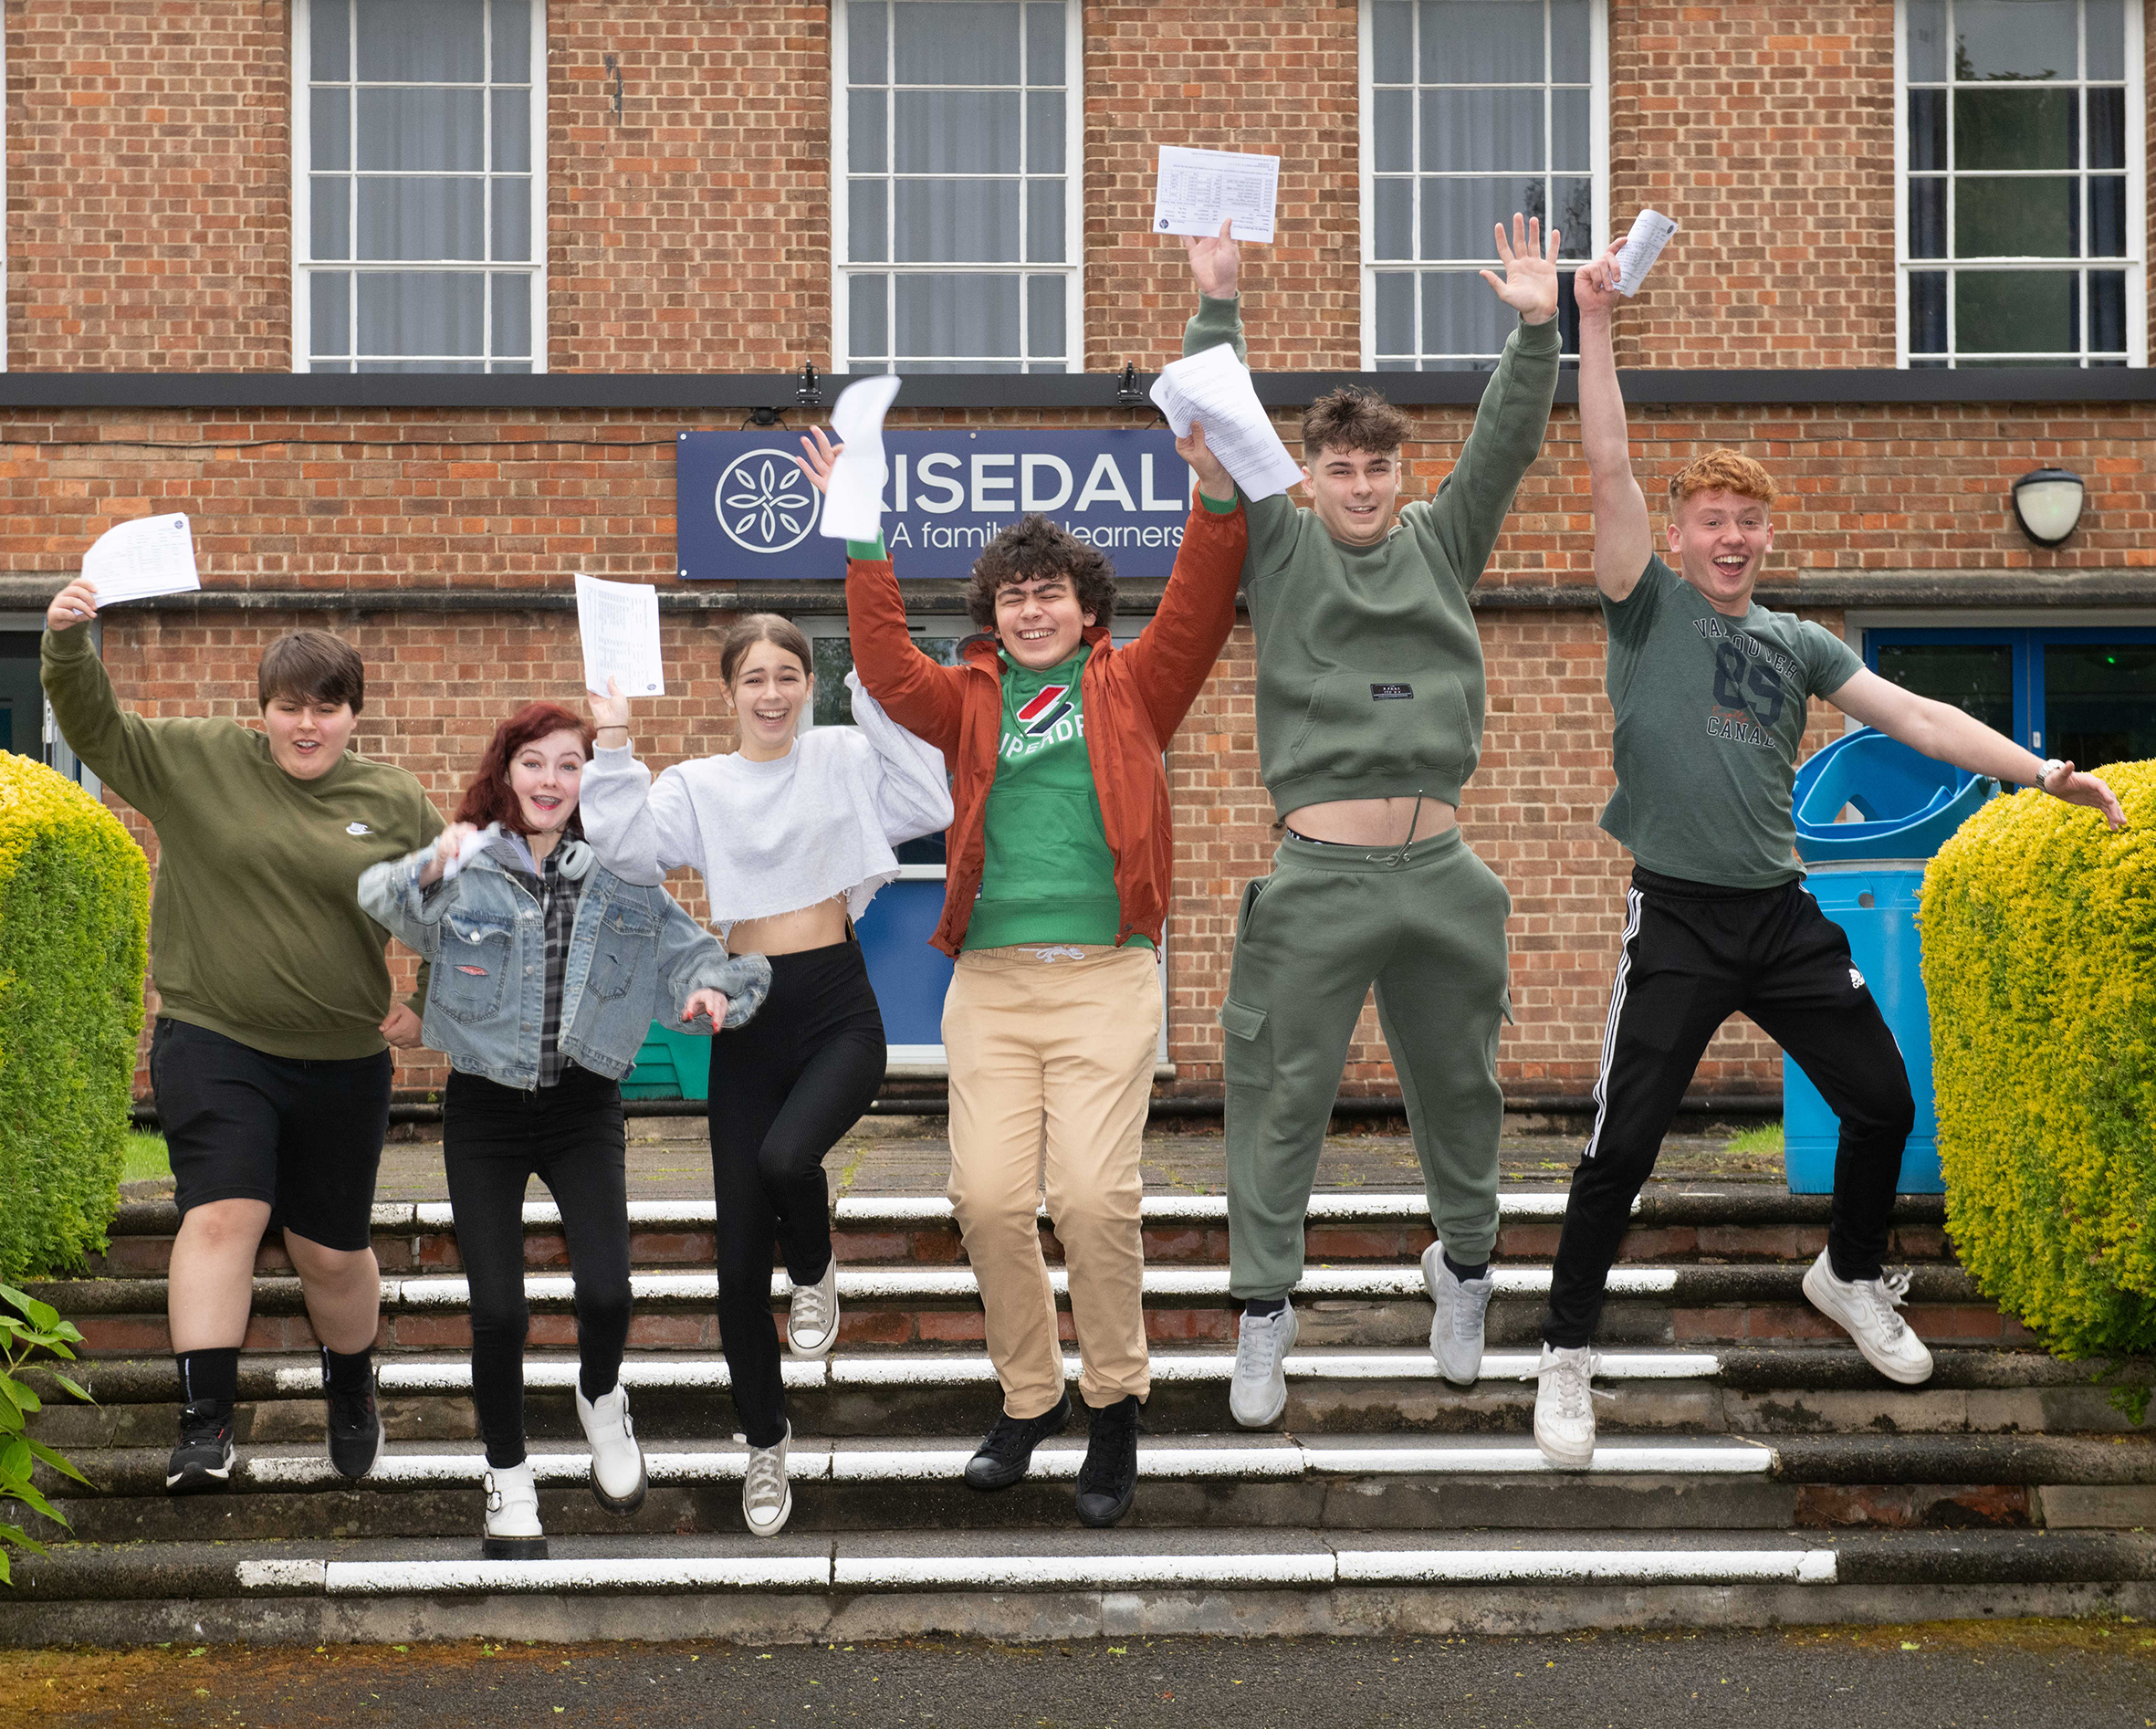 Hard work and determination pays off for pupils at Risedale School celebrating their GCSE results. Pictured from left: Grace Grant, Grace Hoe, Katie Walker, Rogan Glass, Tristan Semons and Shaun Baker.